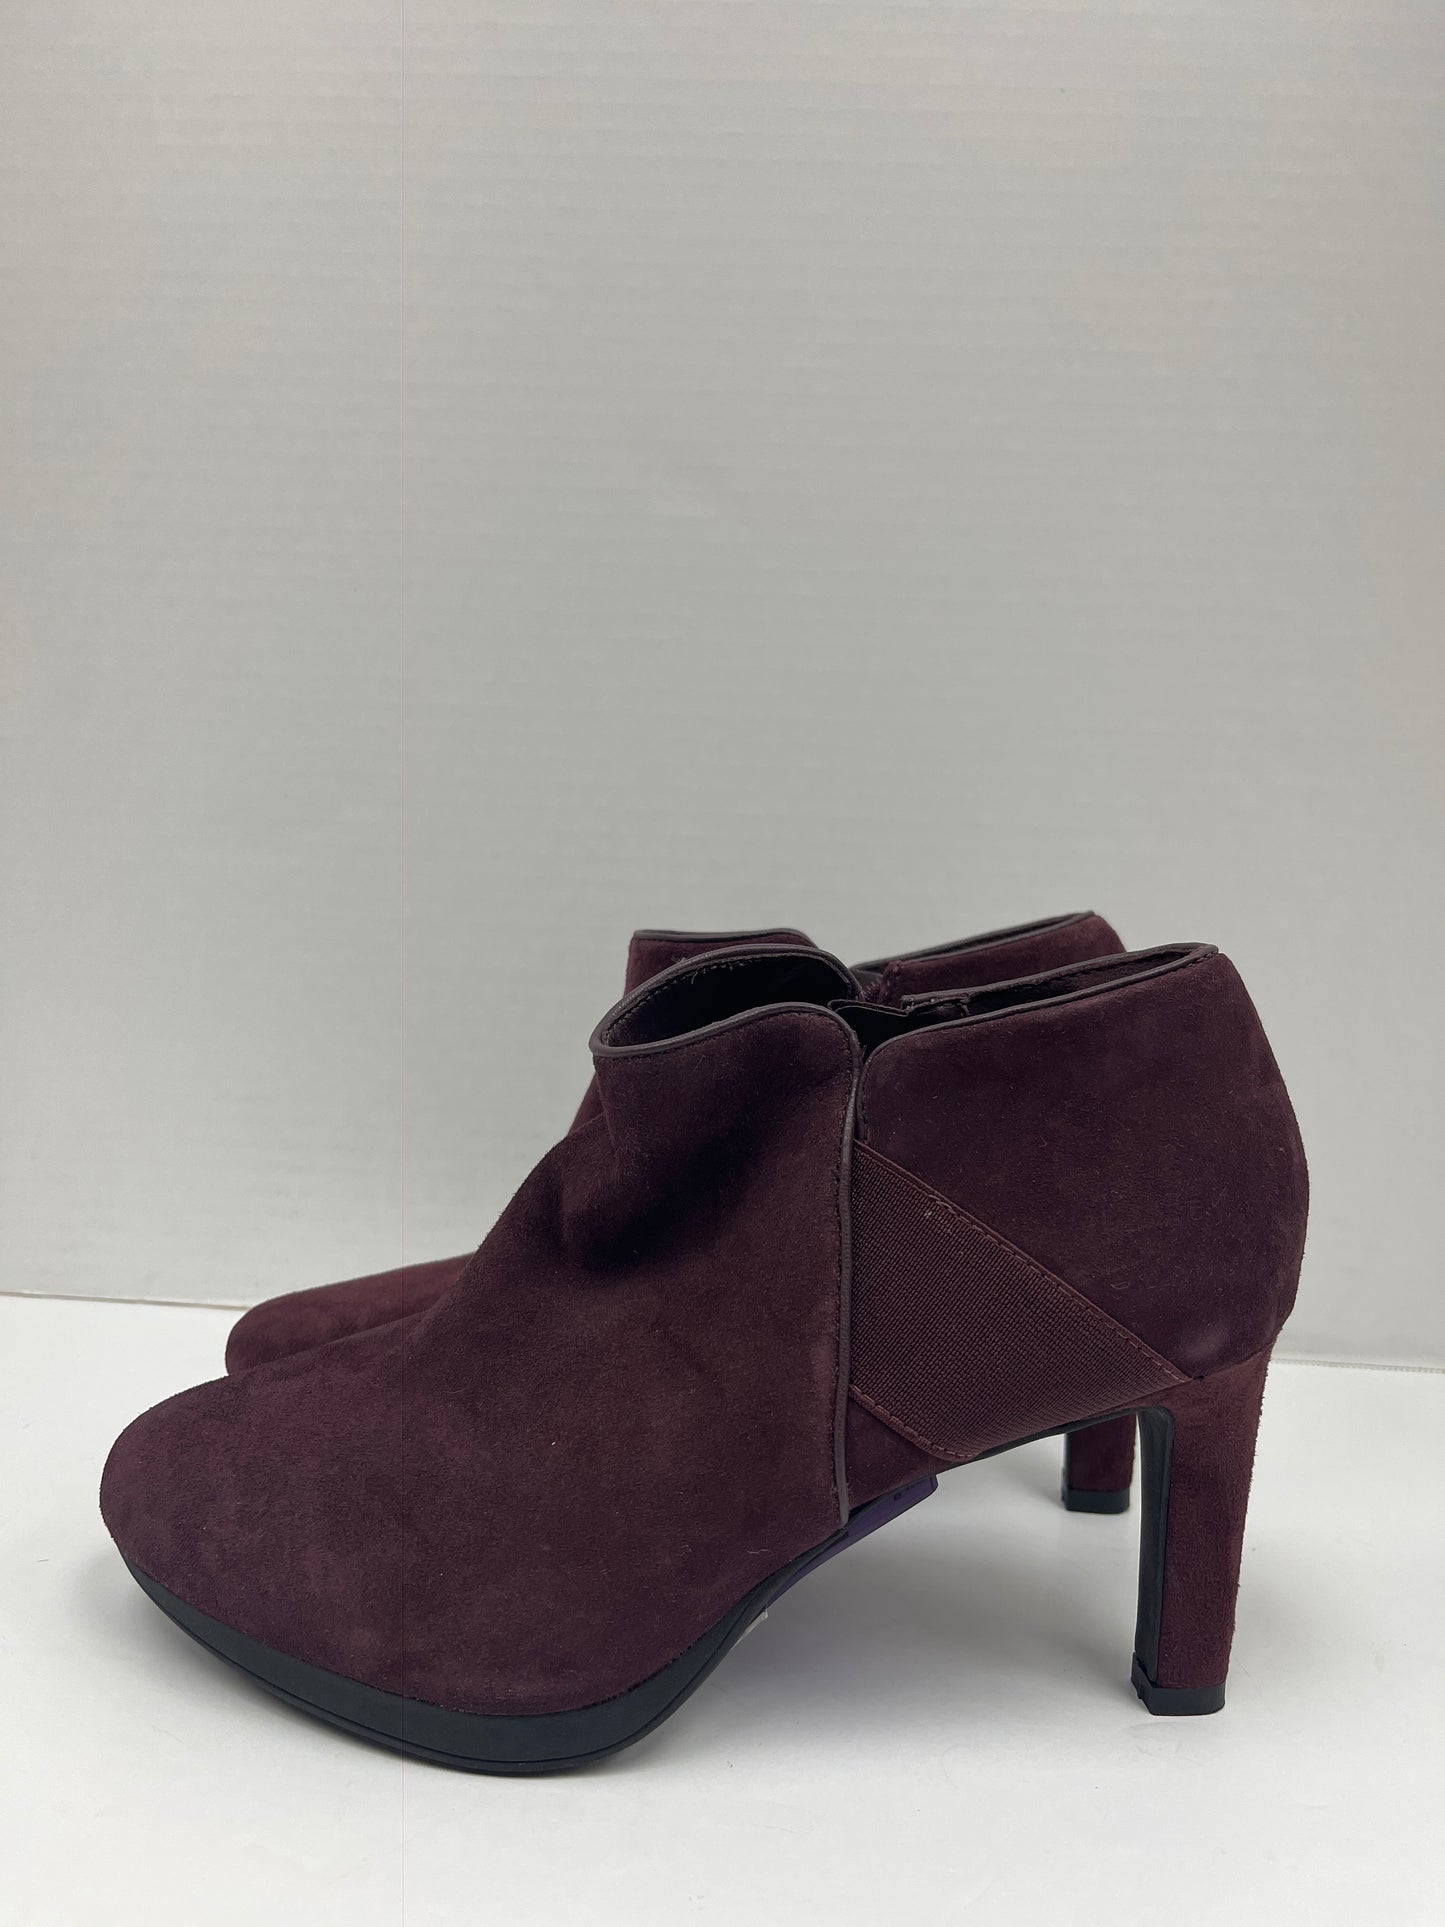 Boots Ankle Heels By Clarks  Size: 9